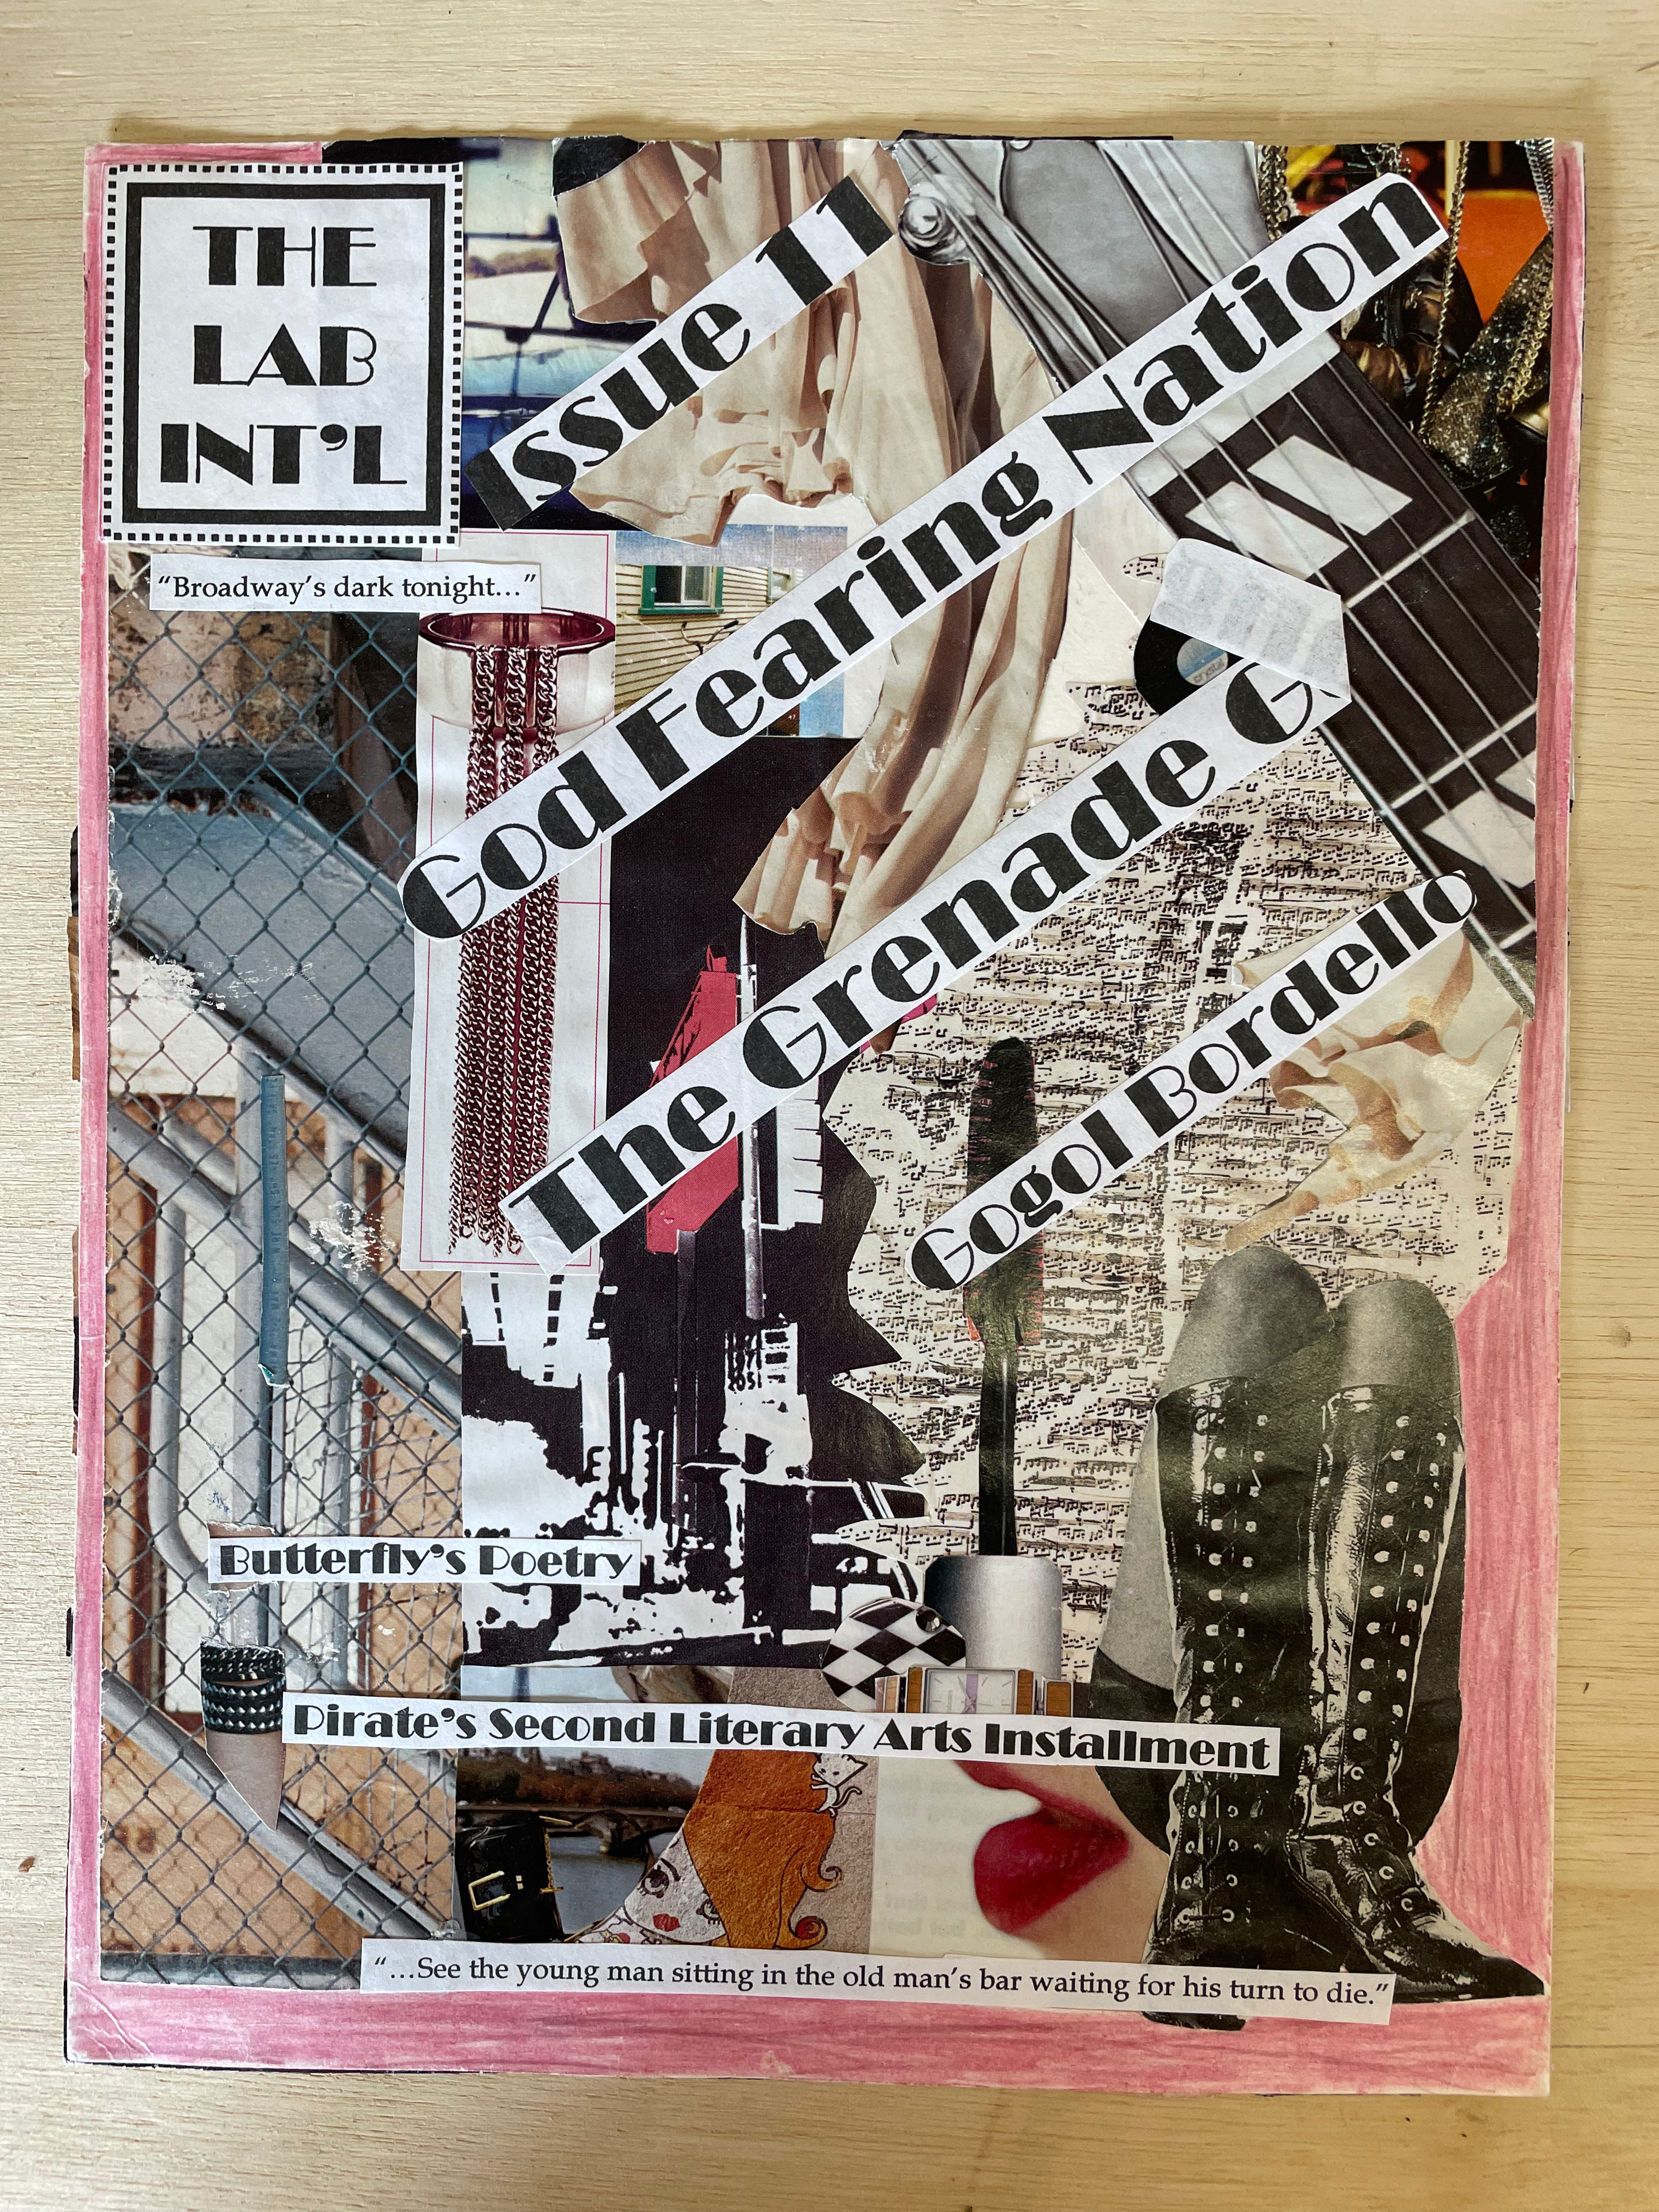 Zine covers with chaotic and colorful collages